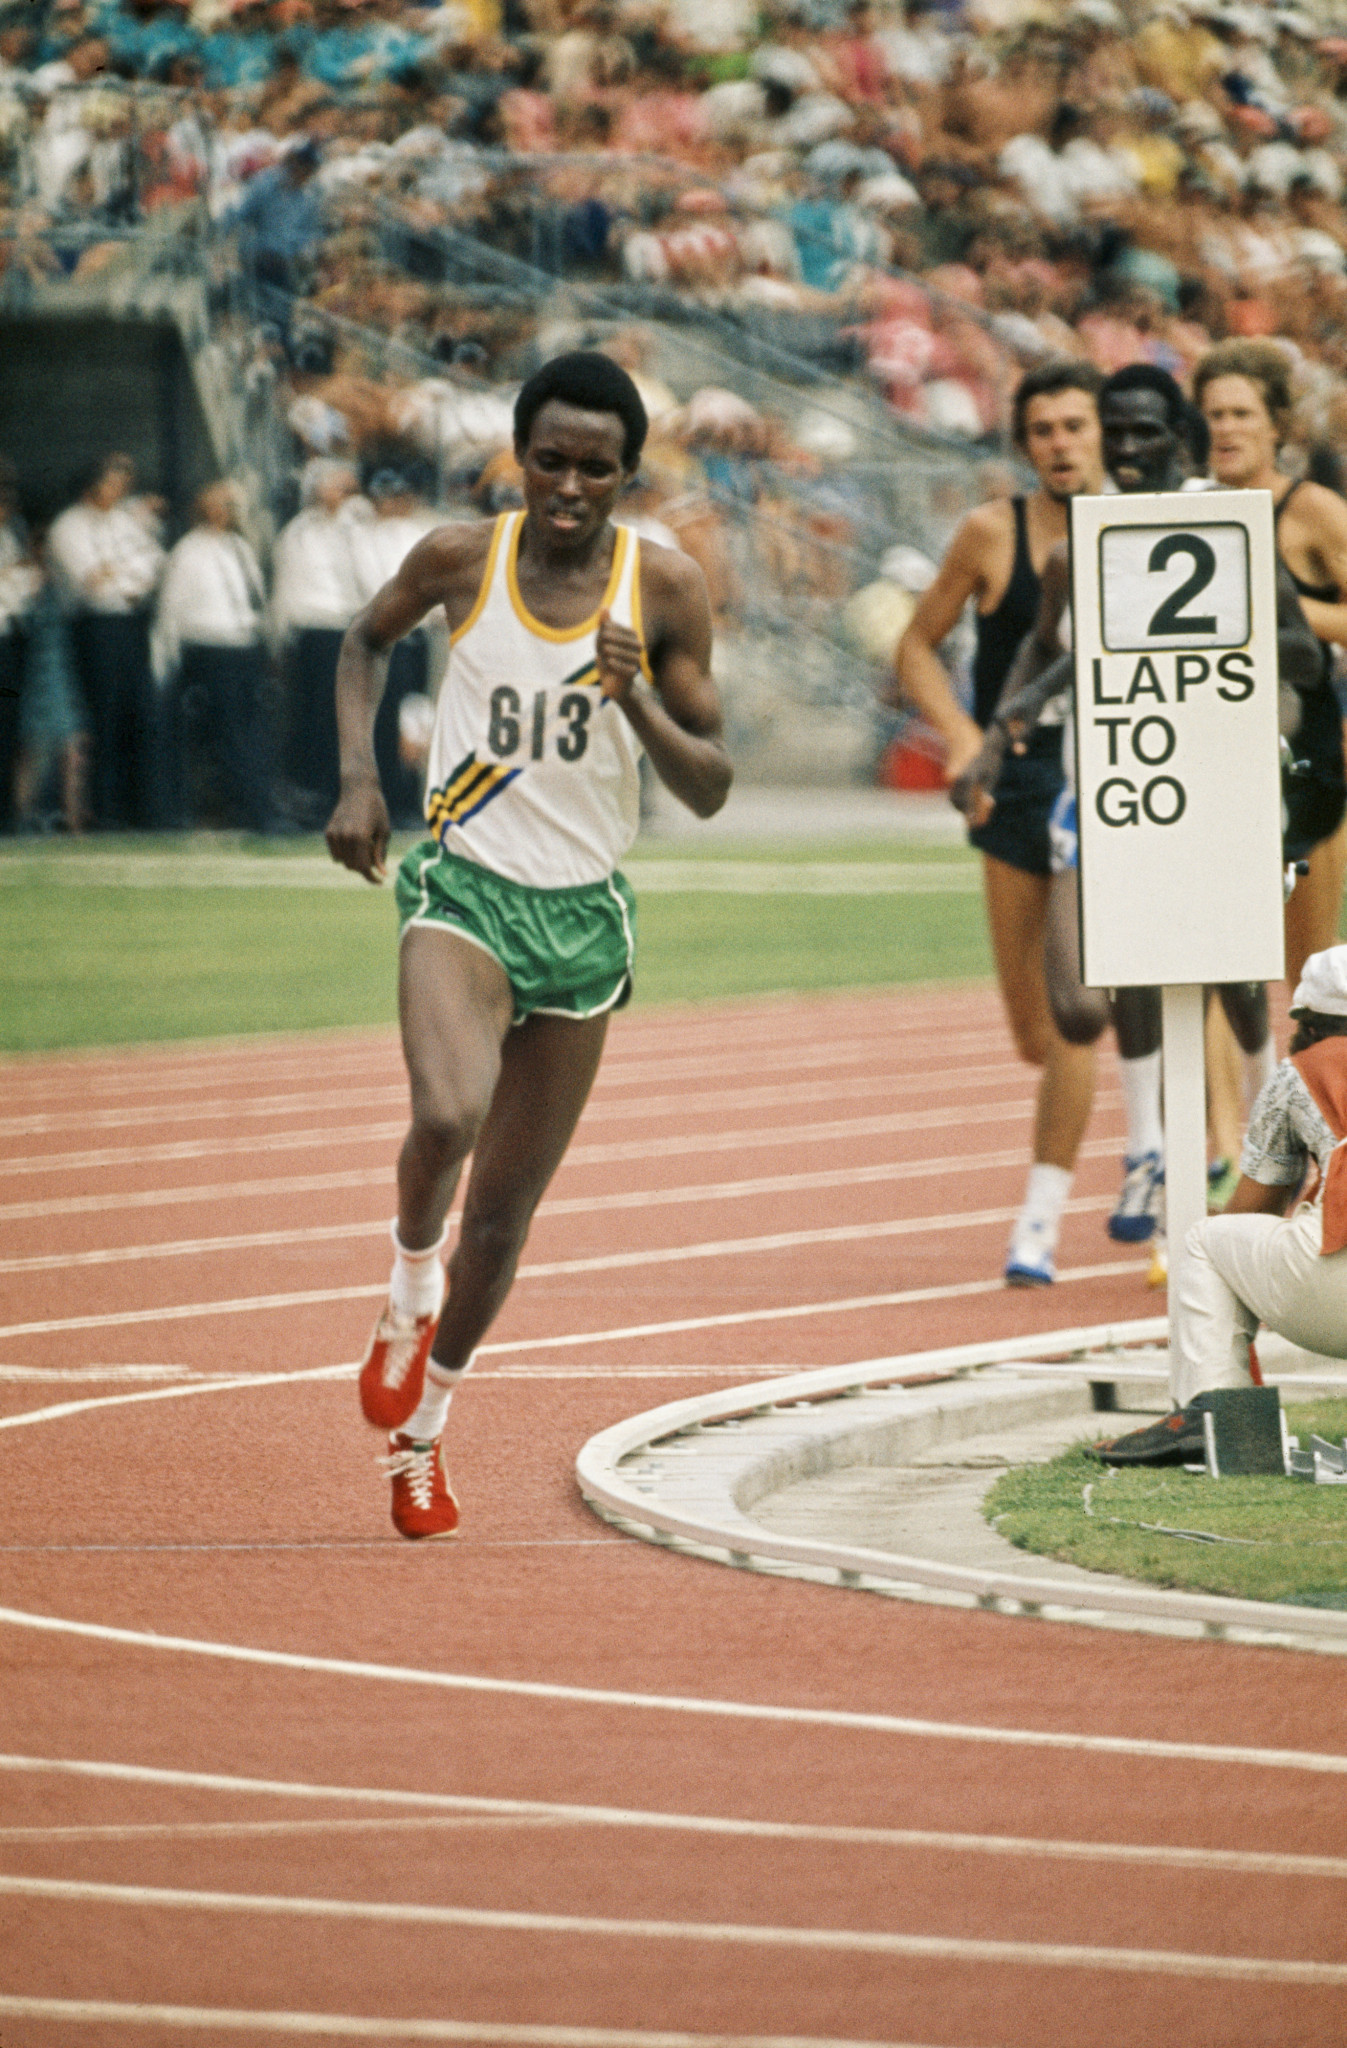 Filbert Bayi developed his unique style of running hard from the front after being jostled during the 1972 Olympic Games in Munich and it paid off when he set a world record for the 1,500m at Christchurch 1974 ©Getty Images